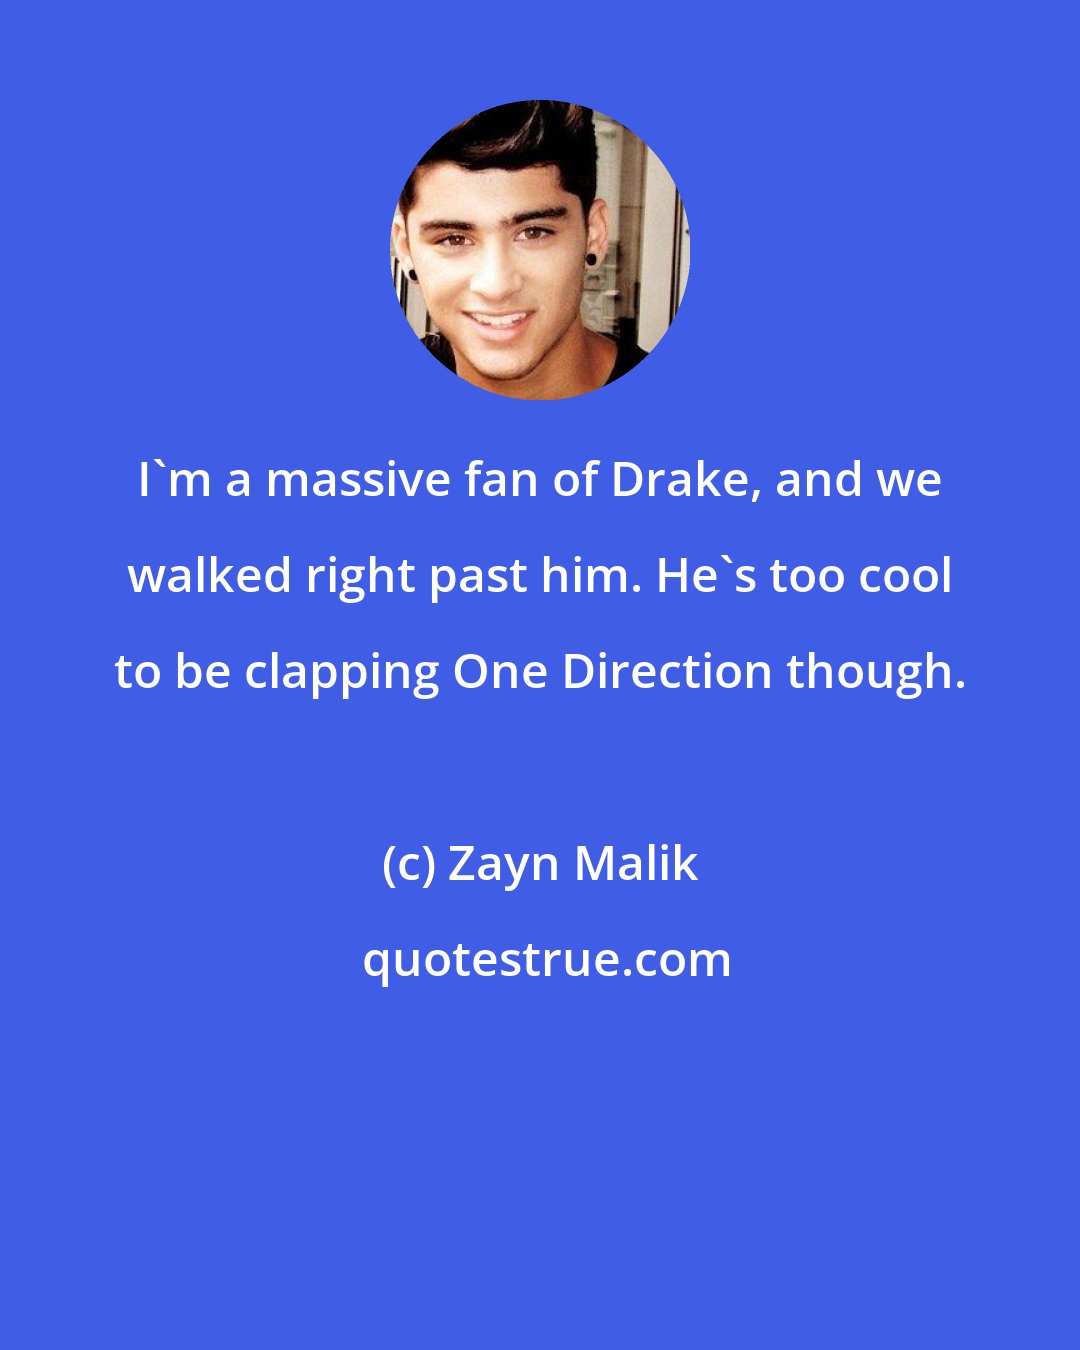 Zayn Malik: I'm a massive fan of Drake, and we walked right past him. He's too cool to be clapping One Direction though.